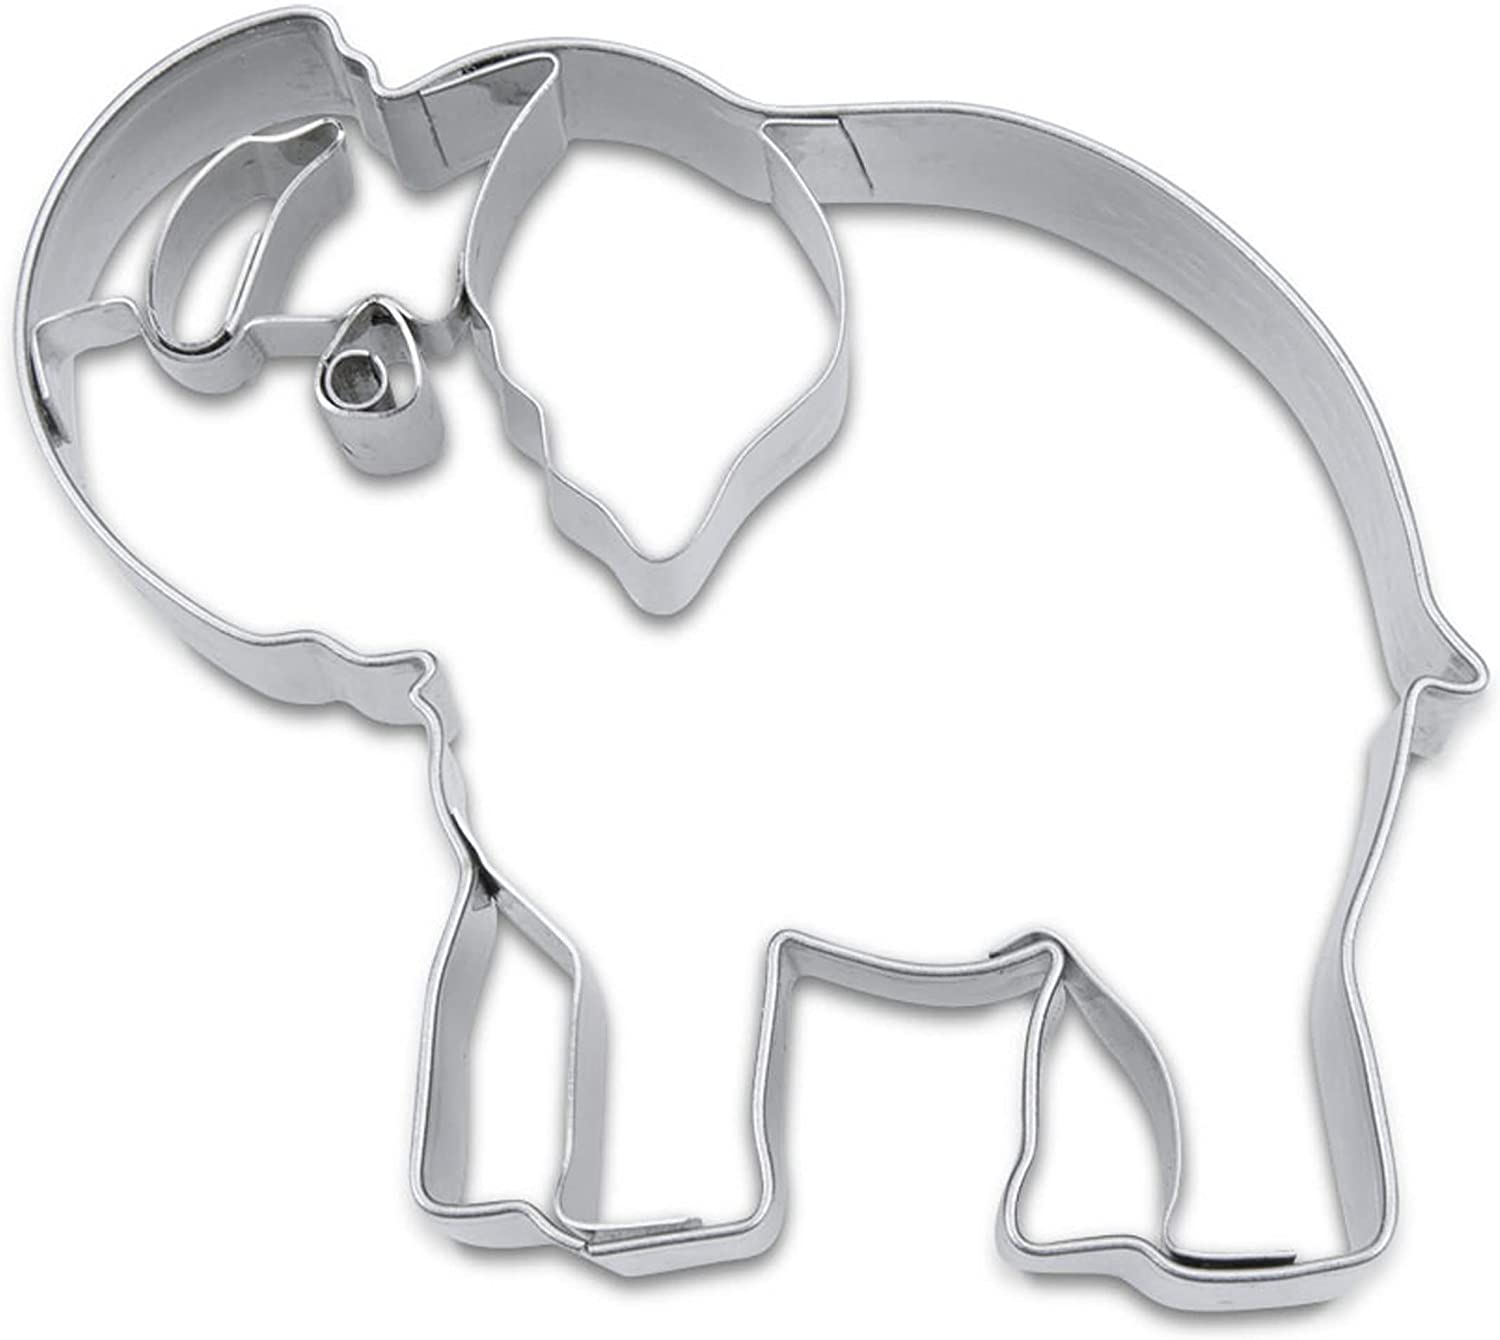 Staedter 5 cm Städter Biscuit Cutter in Shape of Elephant Stainless Steel, 184220